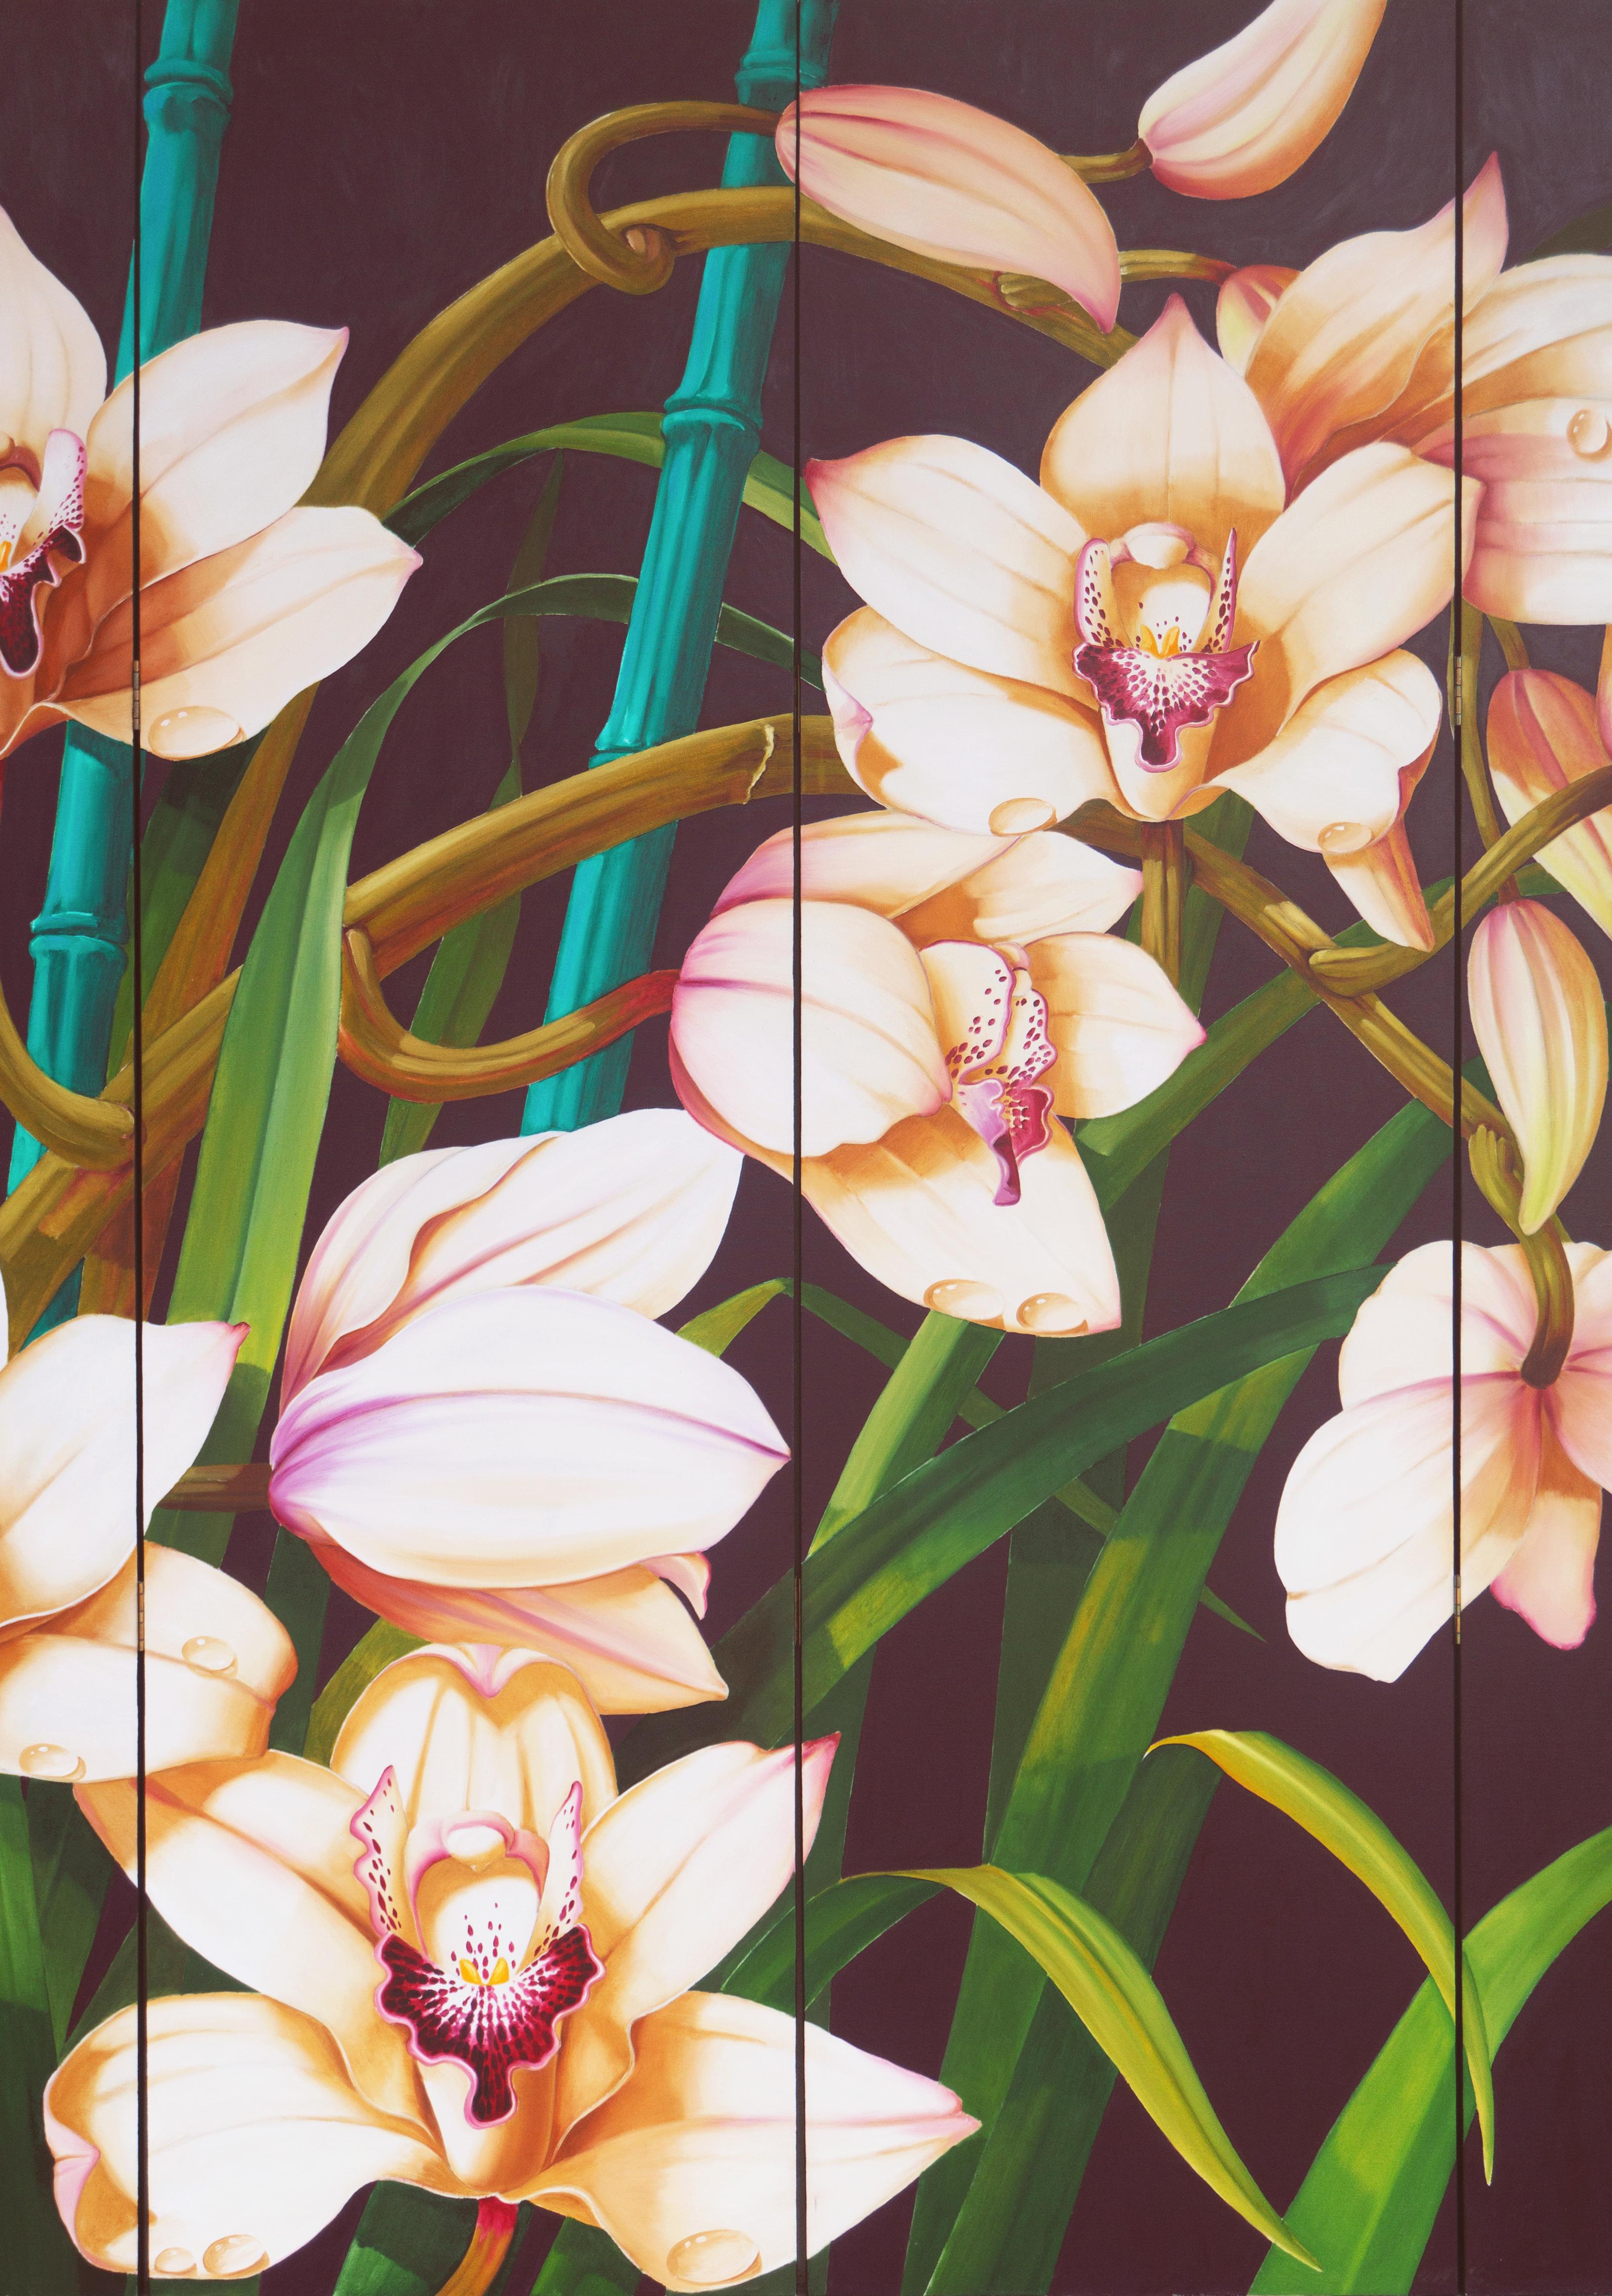 Signed, lower right of right-hand panel, with monogram, 'C.B.' for Charley Brown (American, 1945-2018) and dated 1980. 

A substantial, four-panel painted screen showing a view of elegant Cymbidium orchid blossoms and foliage slashed with jade